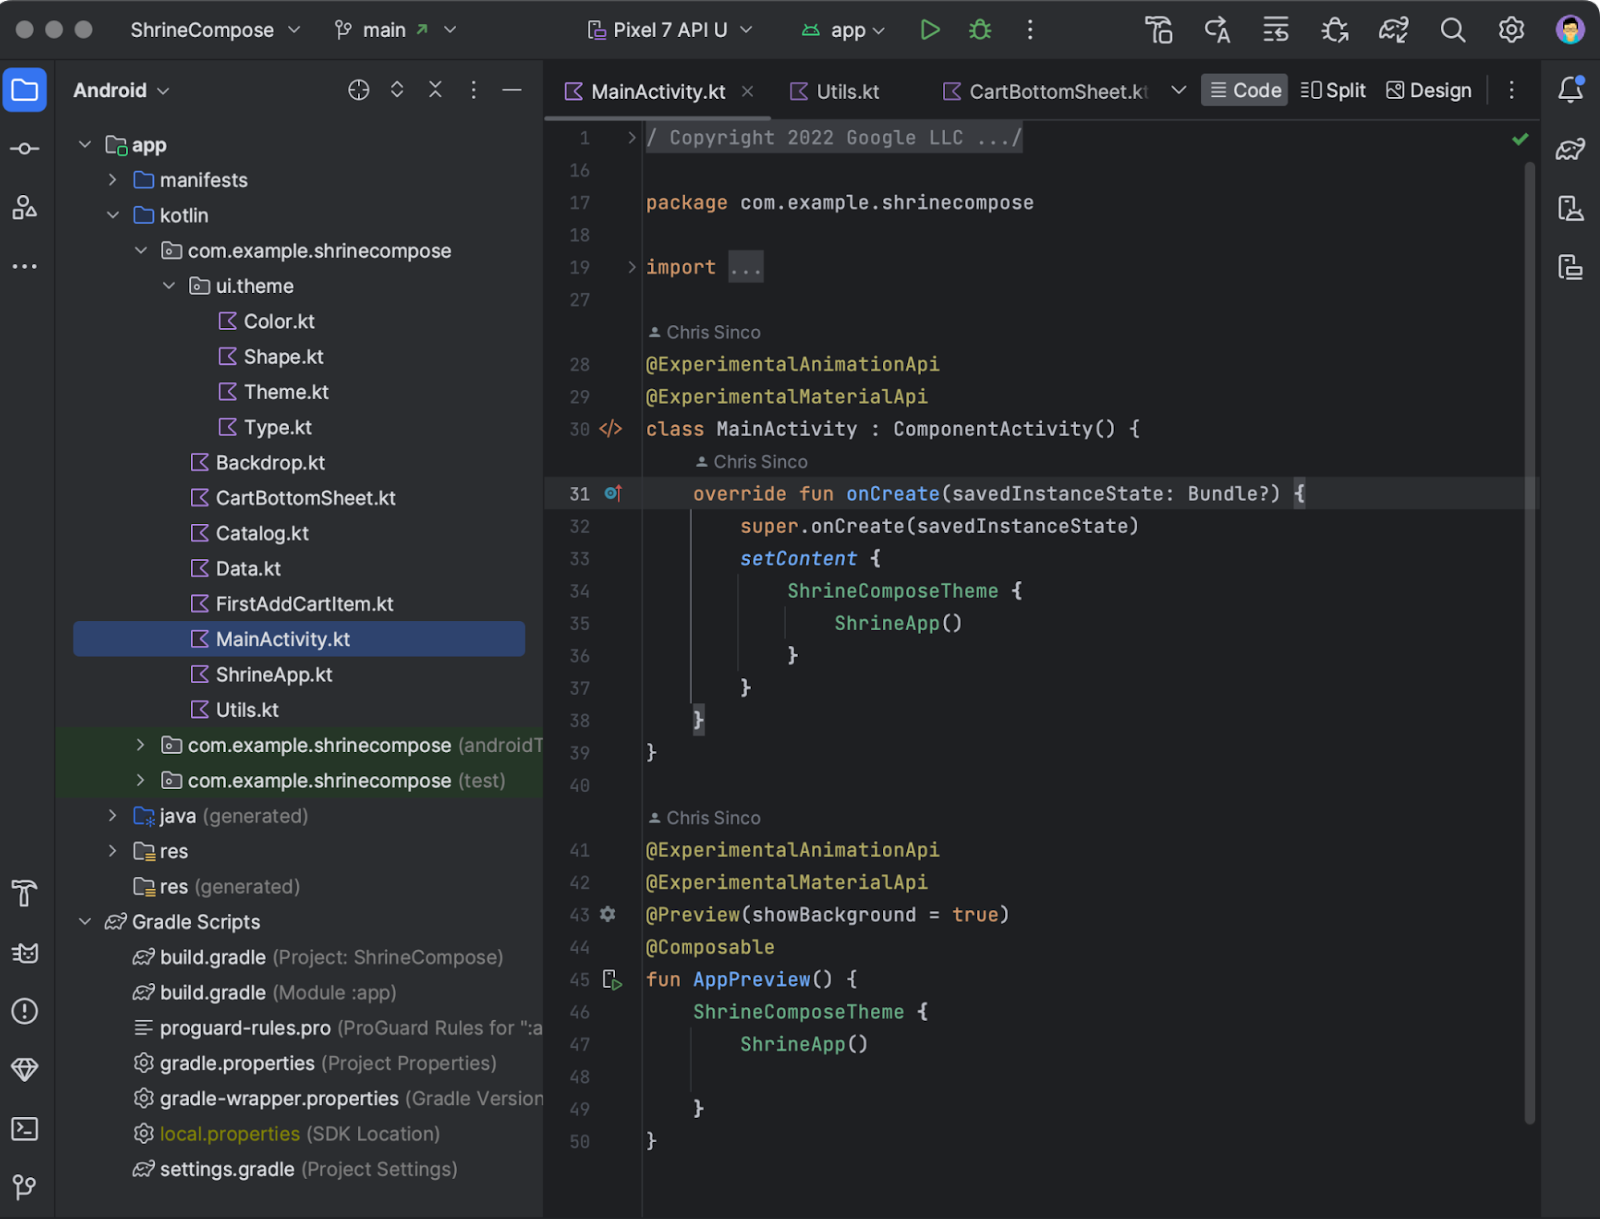 Screengrab showing the new UI adopted from IntelliJ